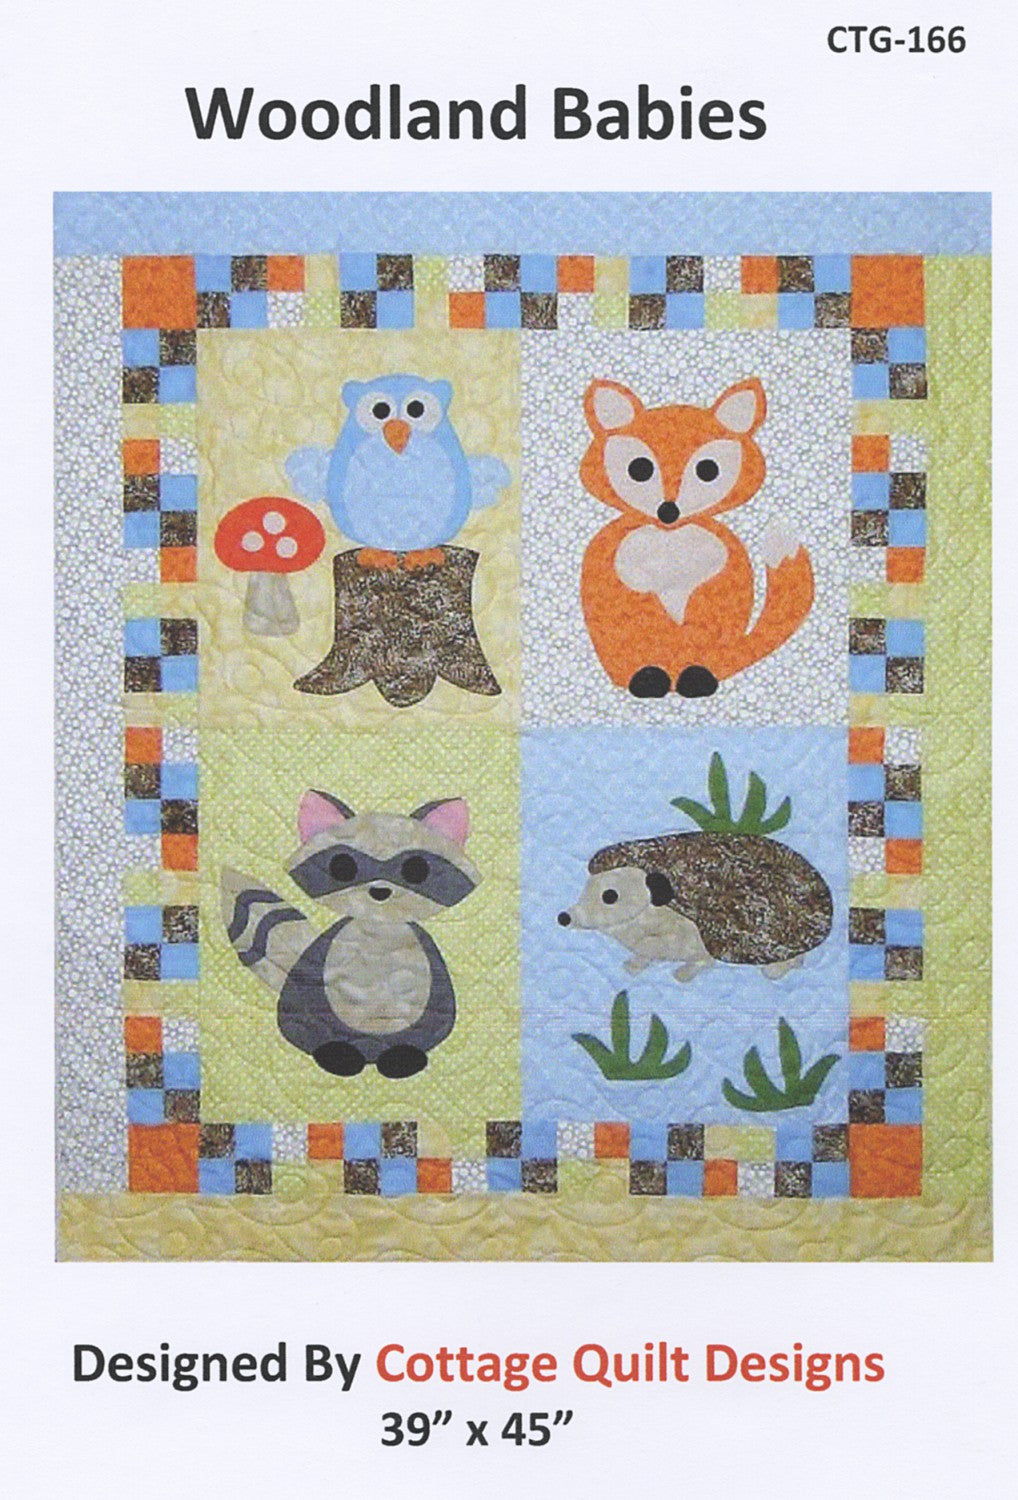 Woodland Babies Quilt Pattern by Cottage Quilt Designs